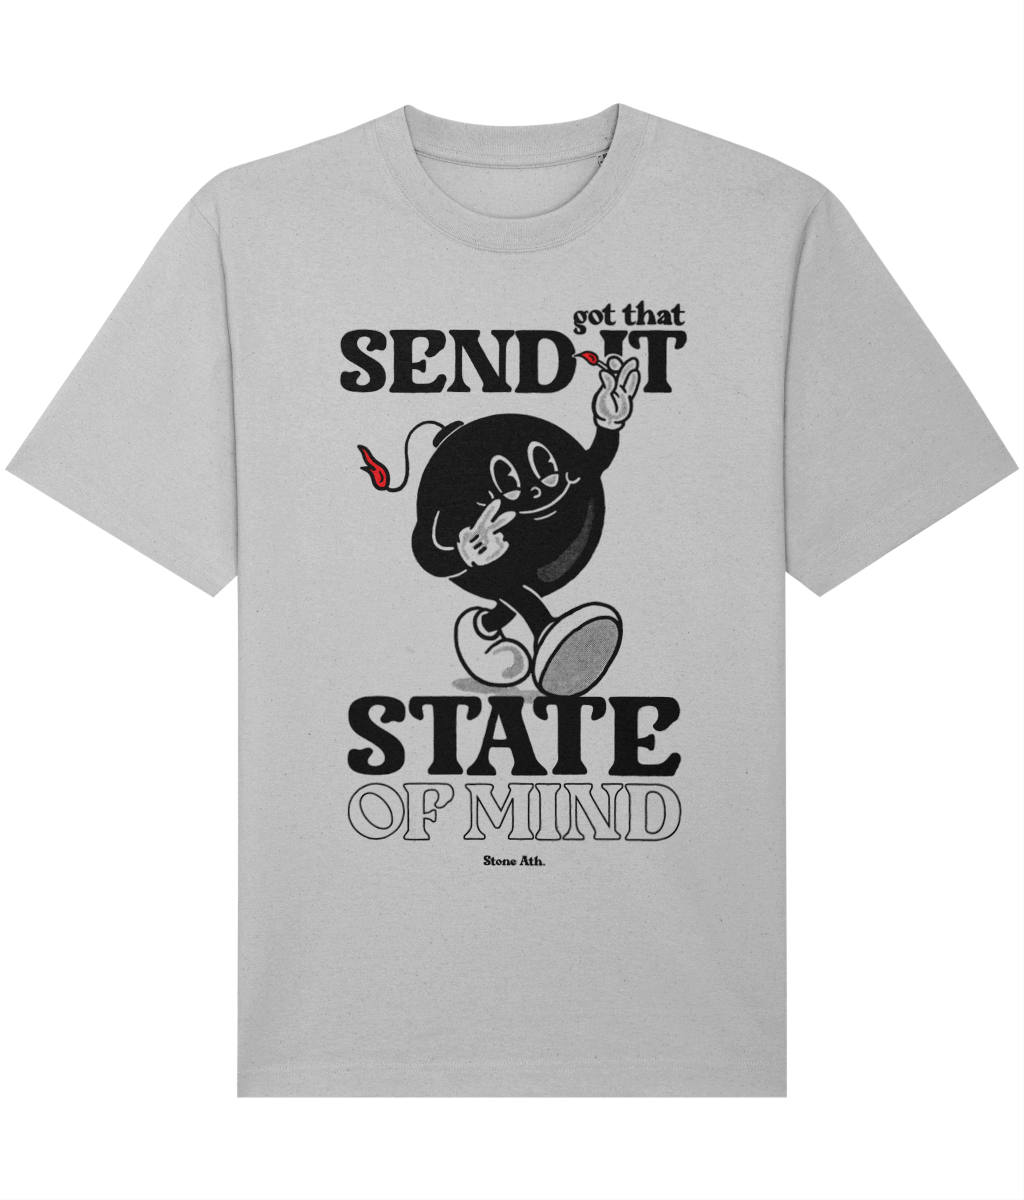 Send it state of mind oversized t-shirt